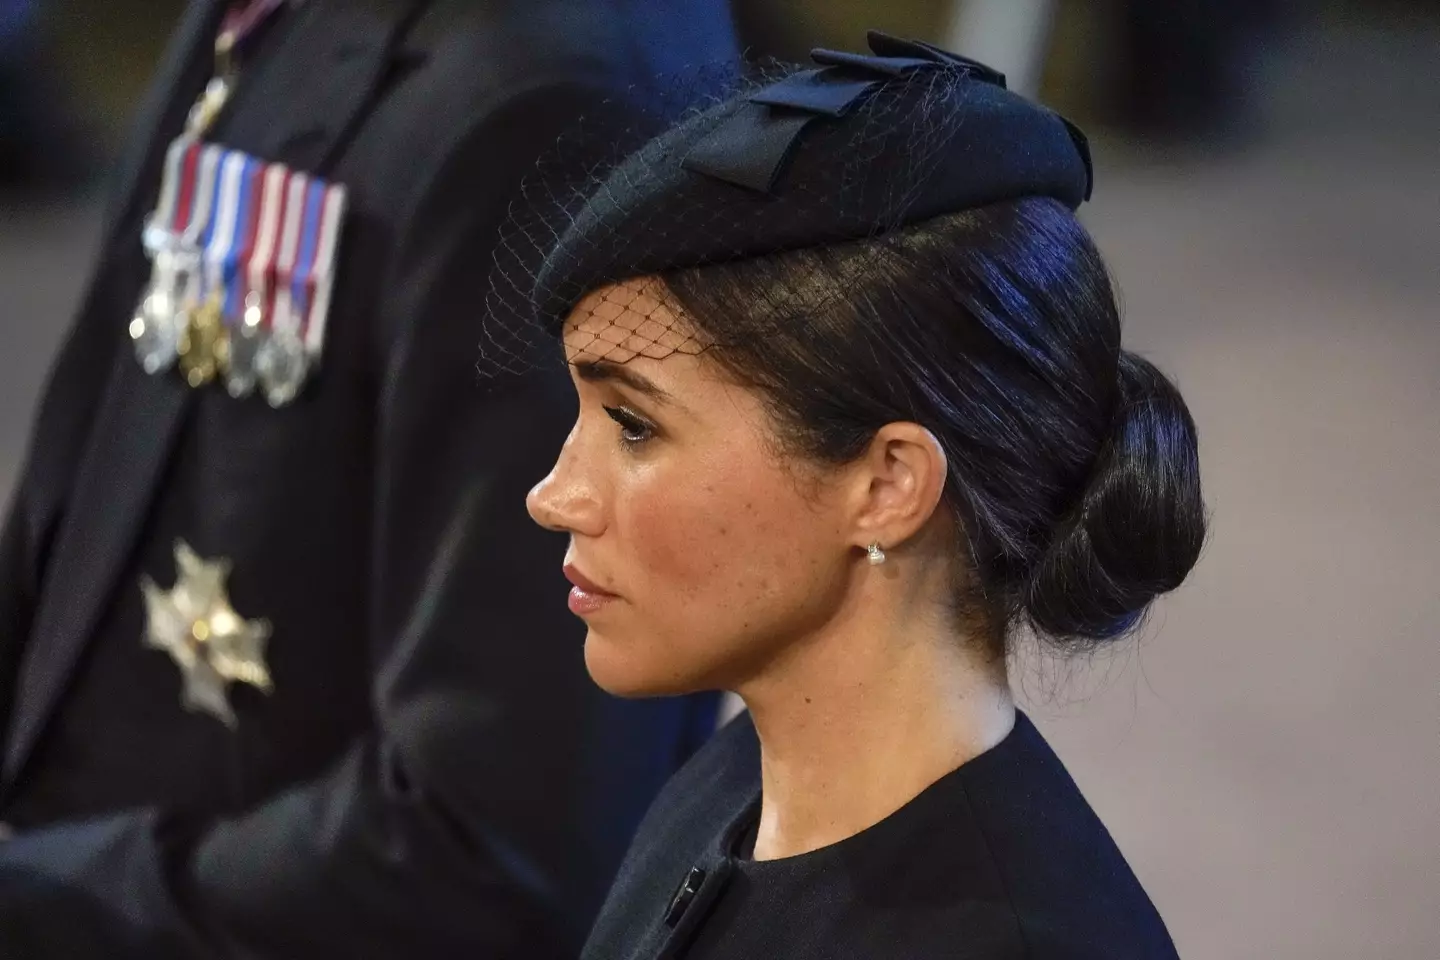 Meghan during the service in Westminster Hall, London, where the coffin of Queen Elizabeth II lied in state.